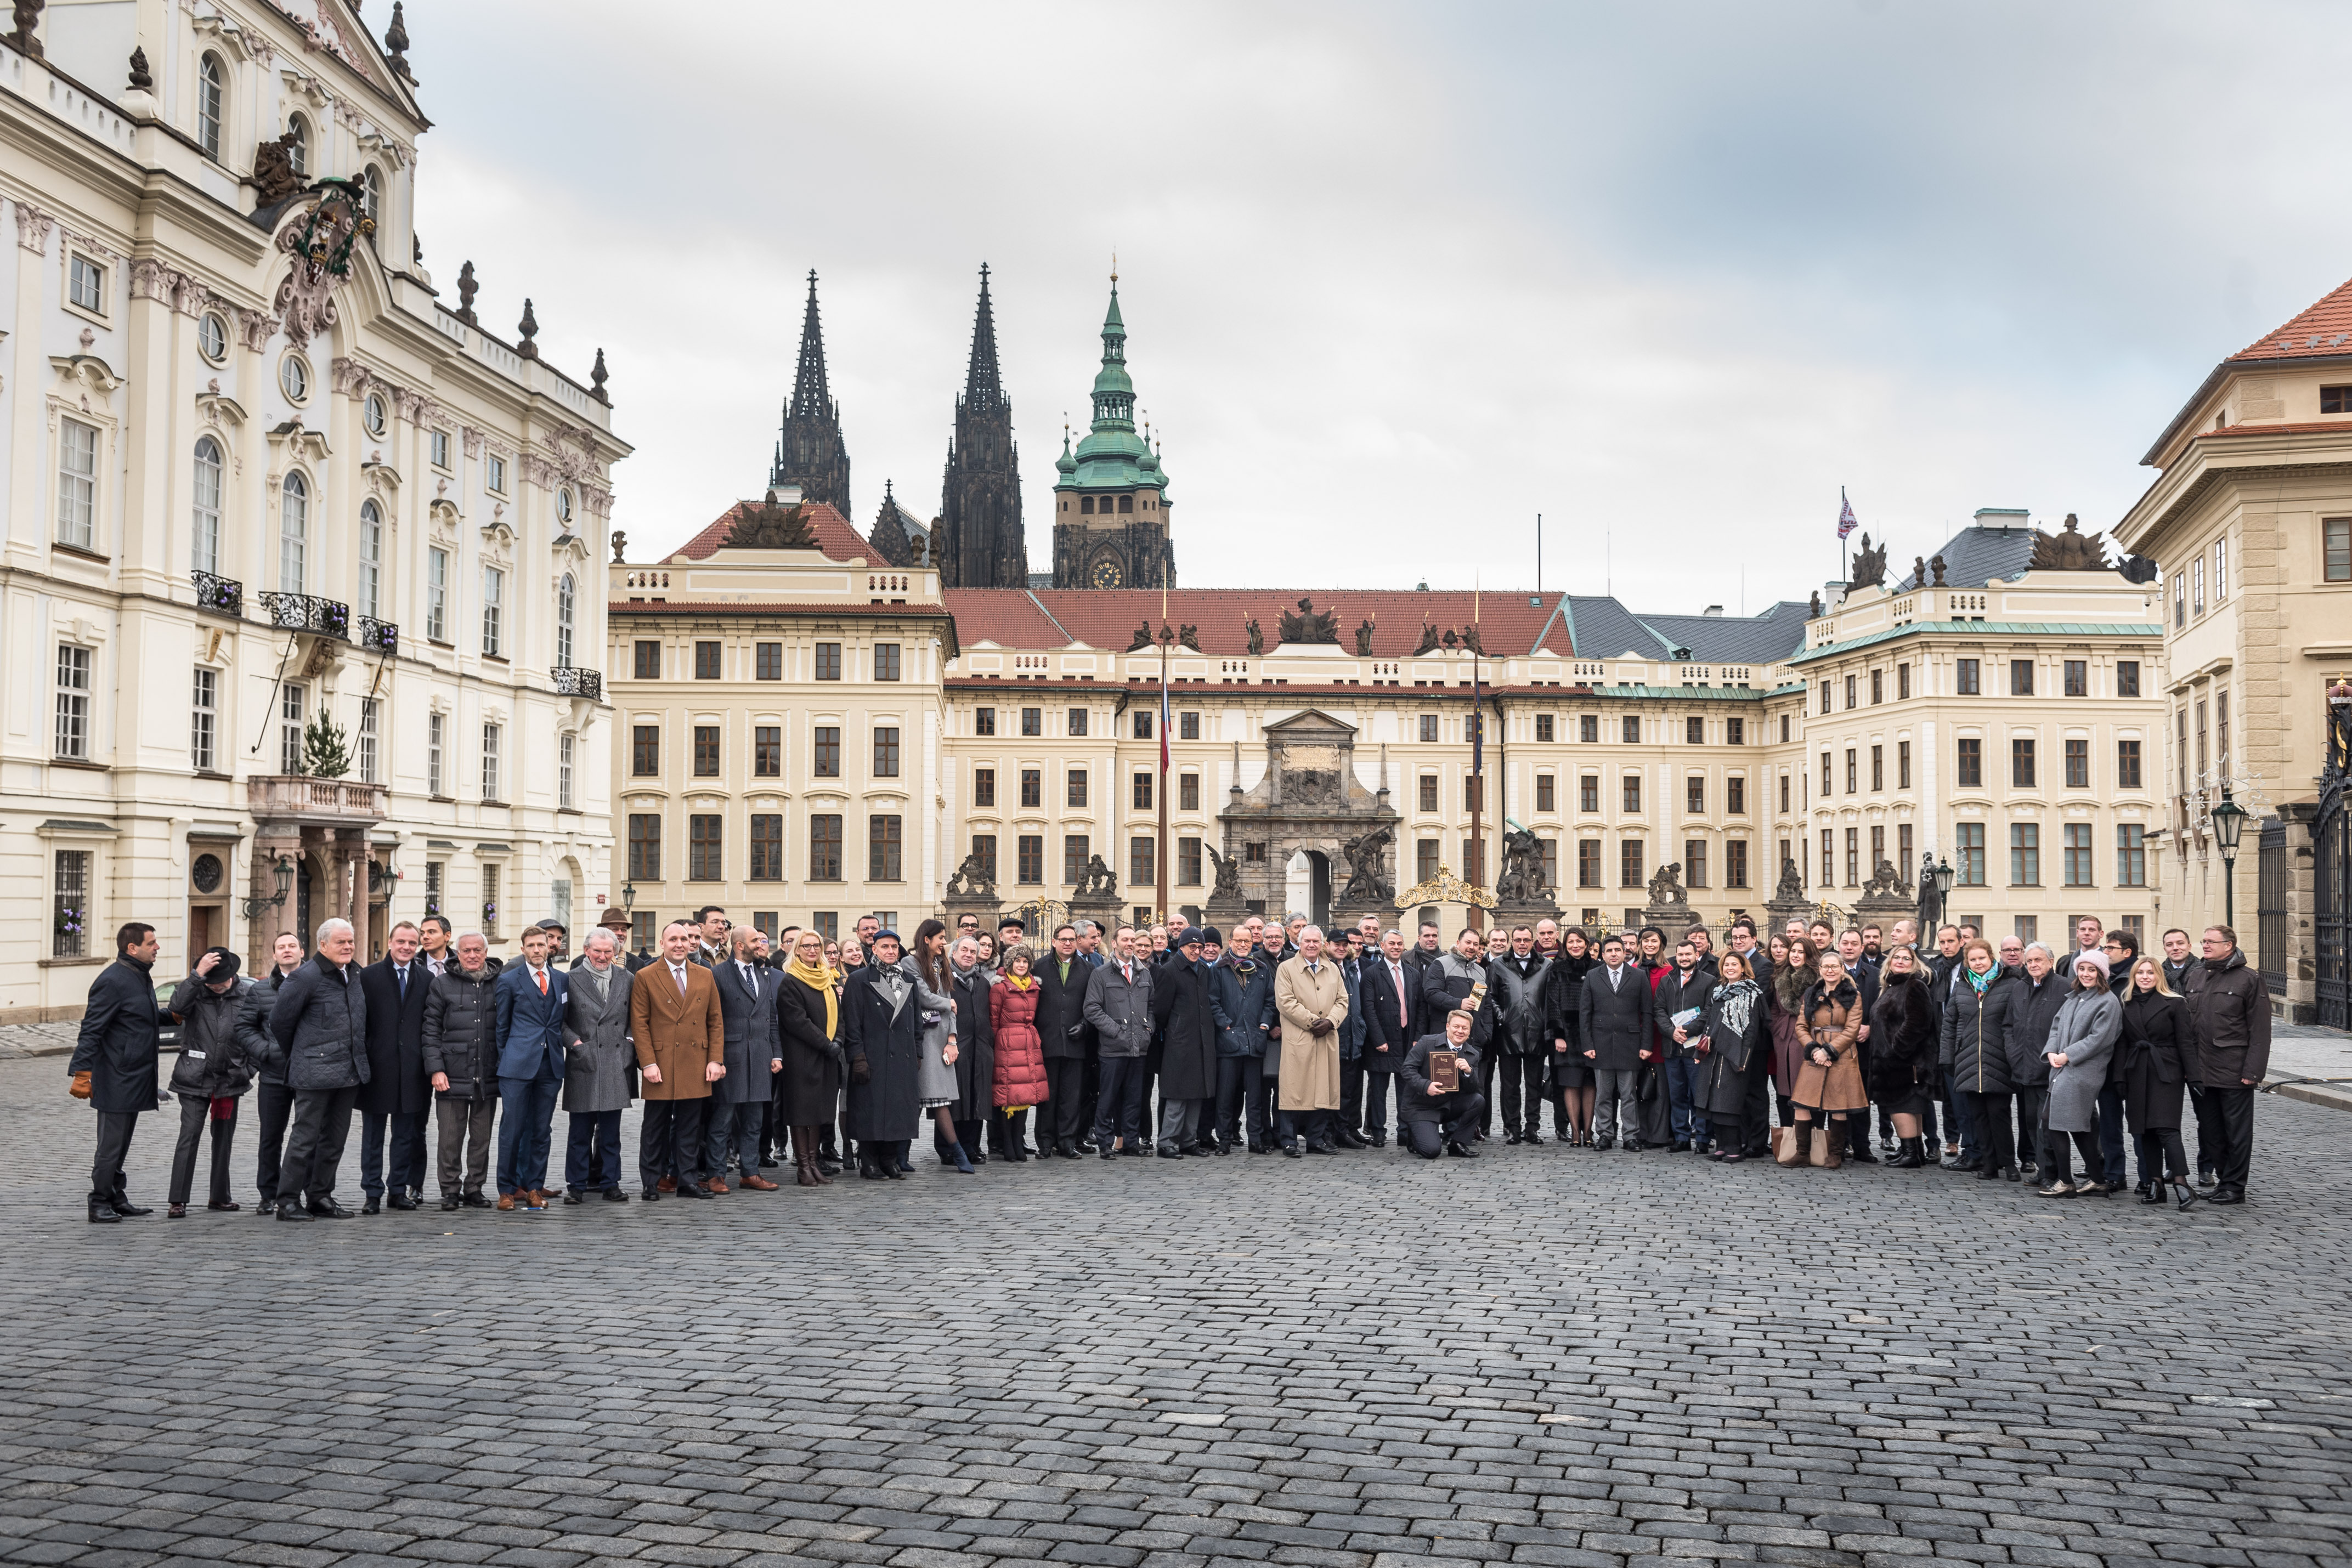 Prague Rules were officially launched